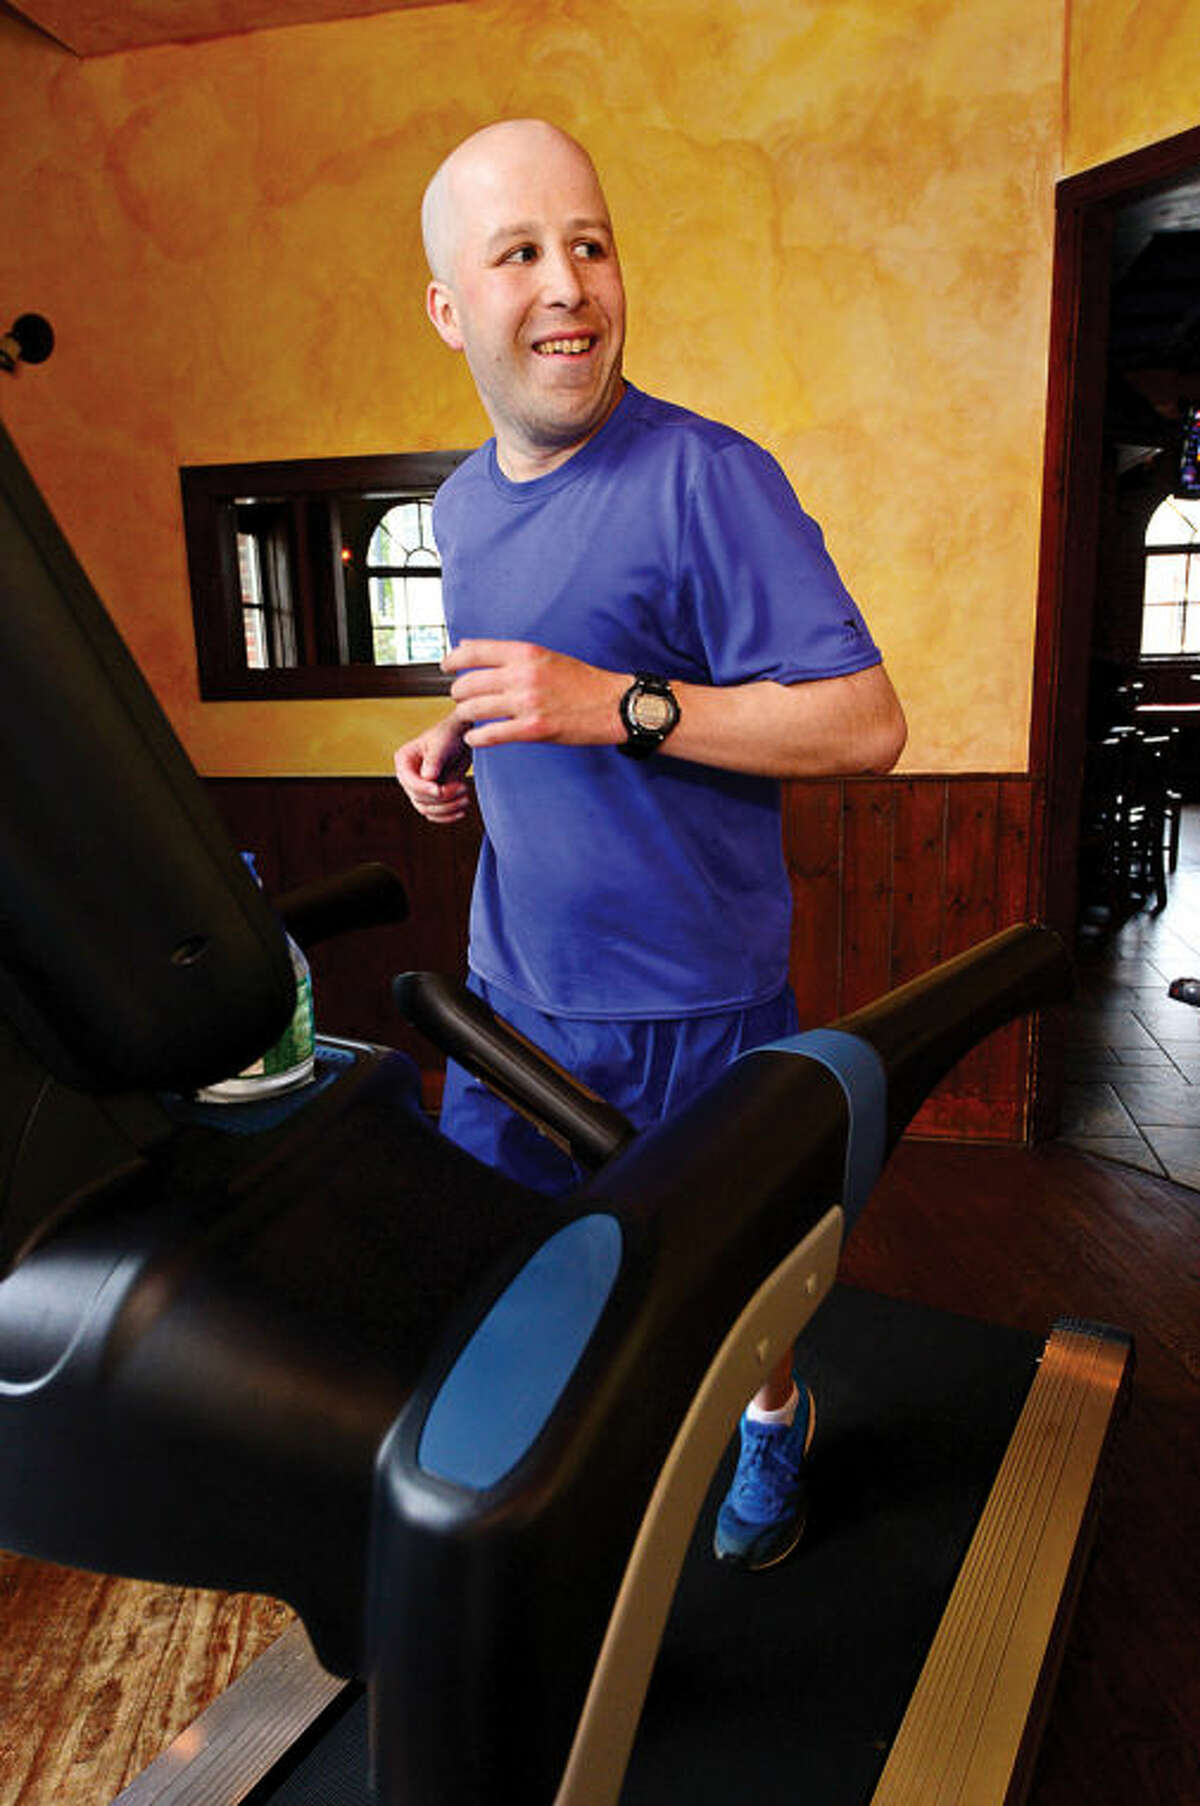 Norwalk resident Jimmy Booth participates in the “Run in the Pub” charity event at O’Neill’s Pub saturday. Booth runs the marthon on a treadmill to benefit the Open Door Shelter and Jo Mazzo’s Time to Fight fund.